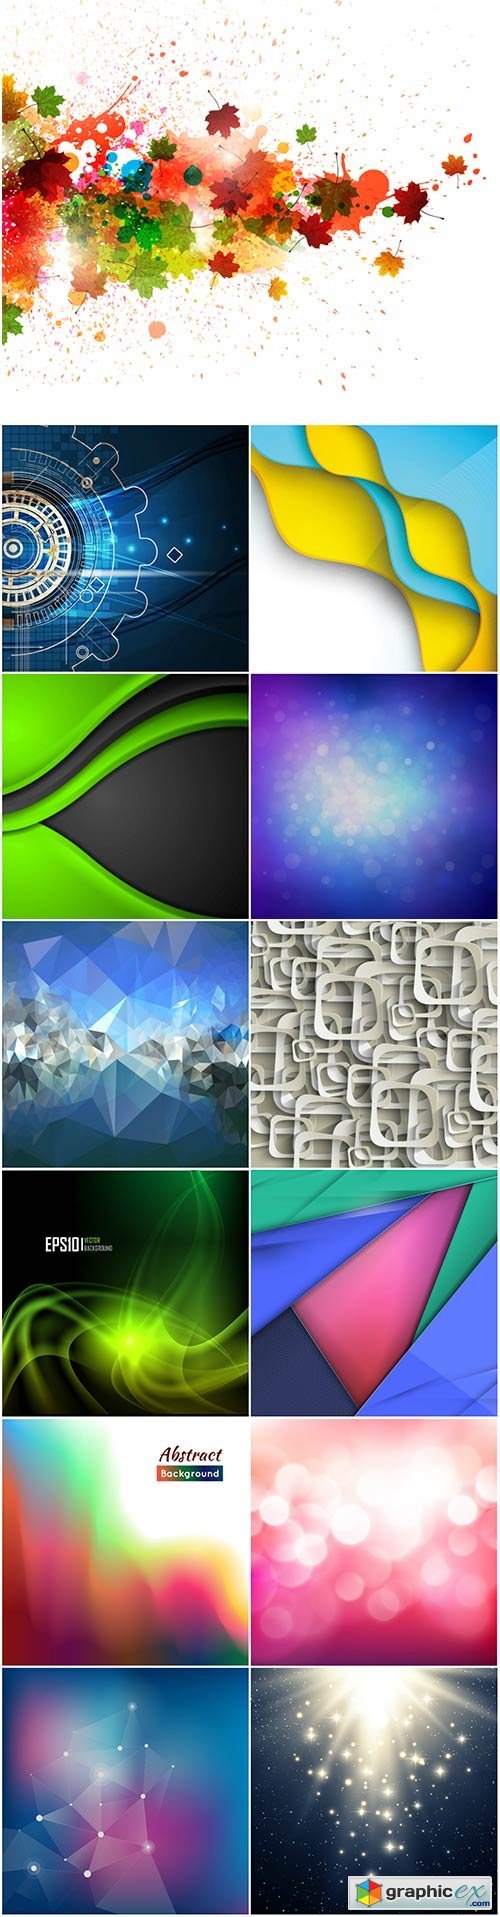 Bright colorful abstract backgrounds vector -44